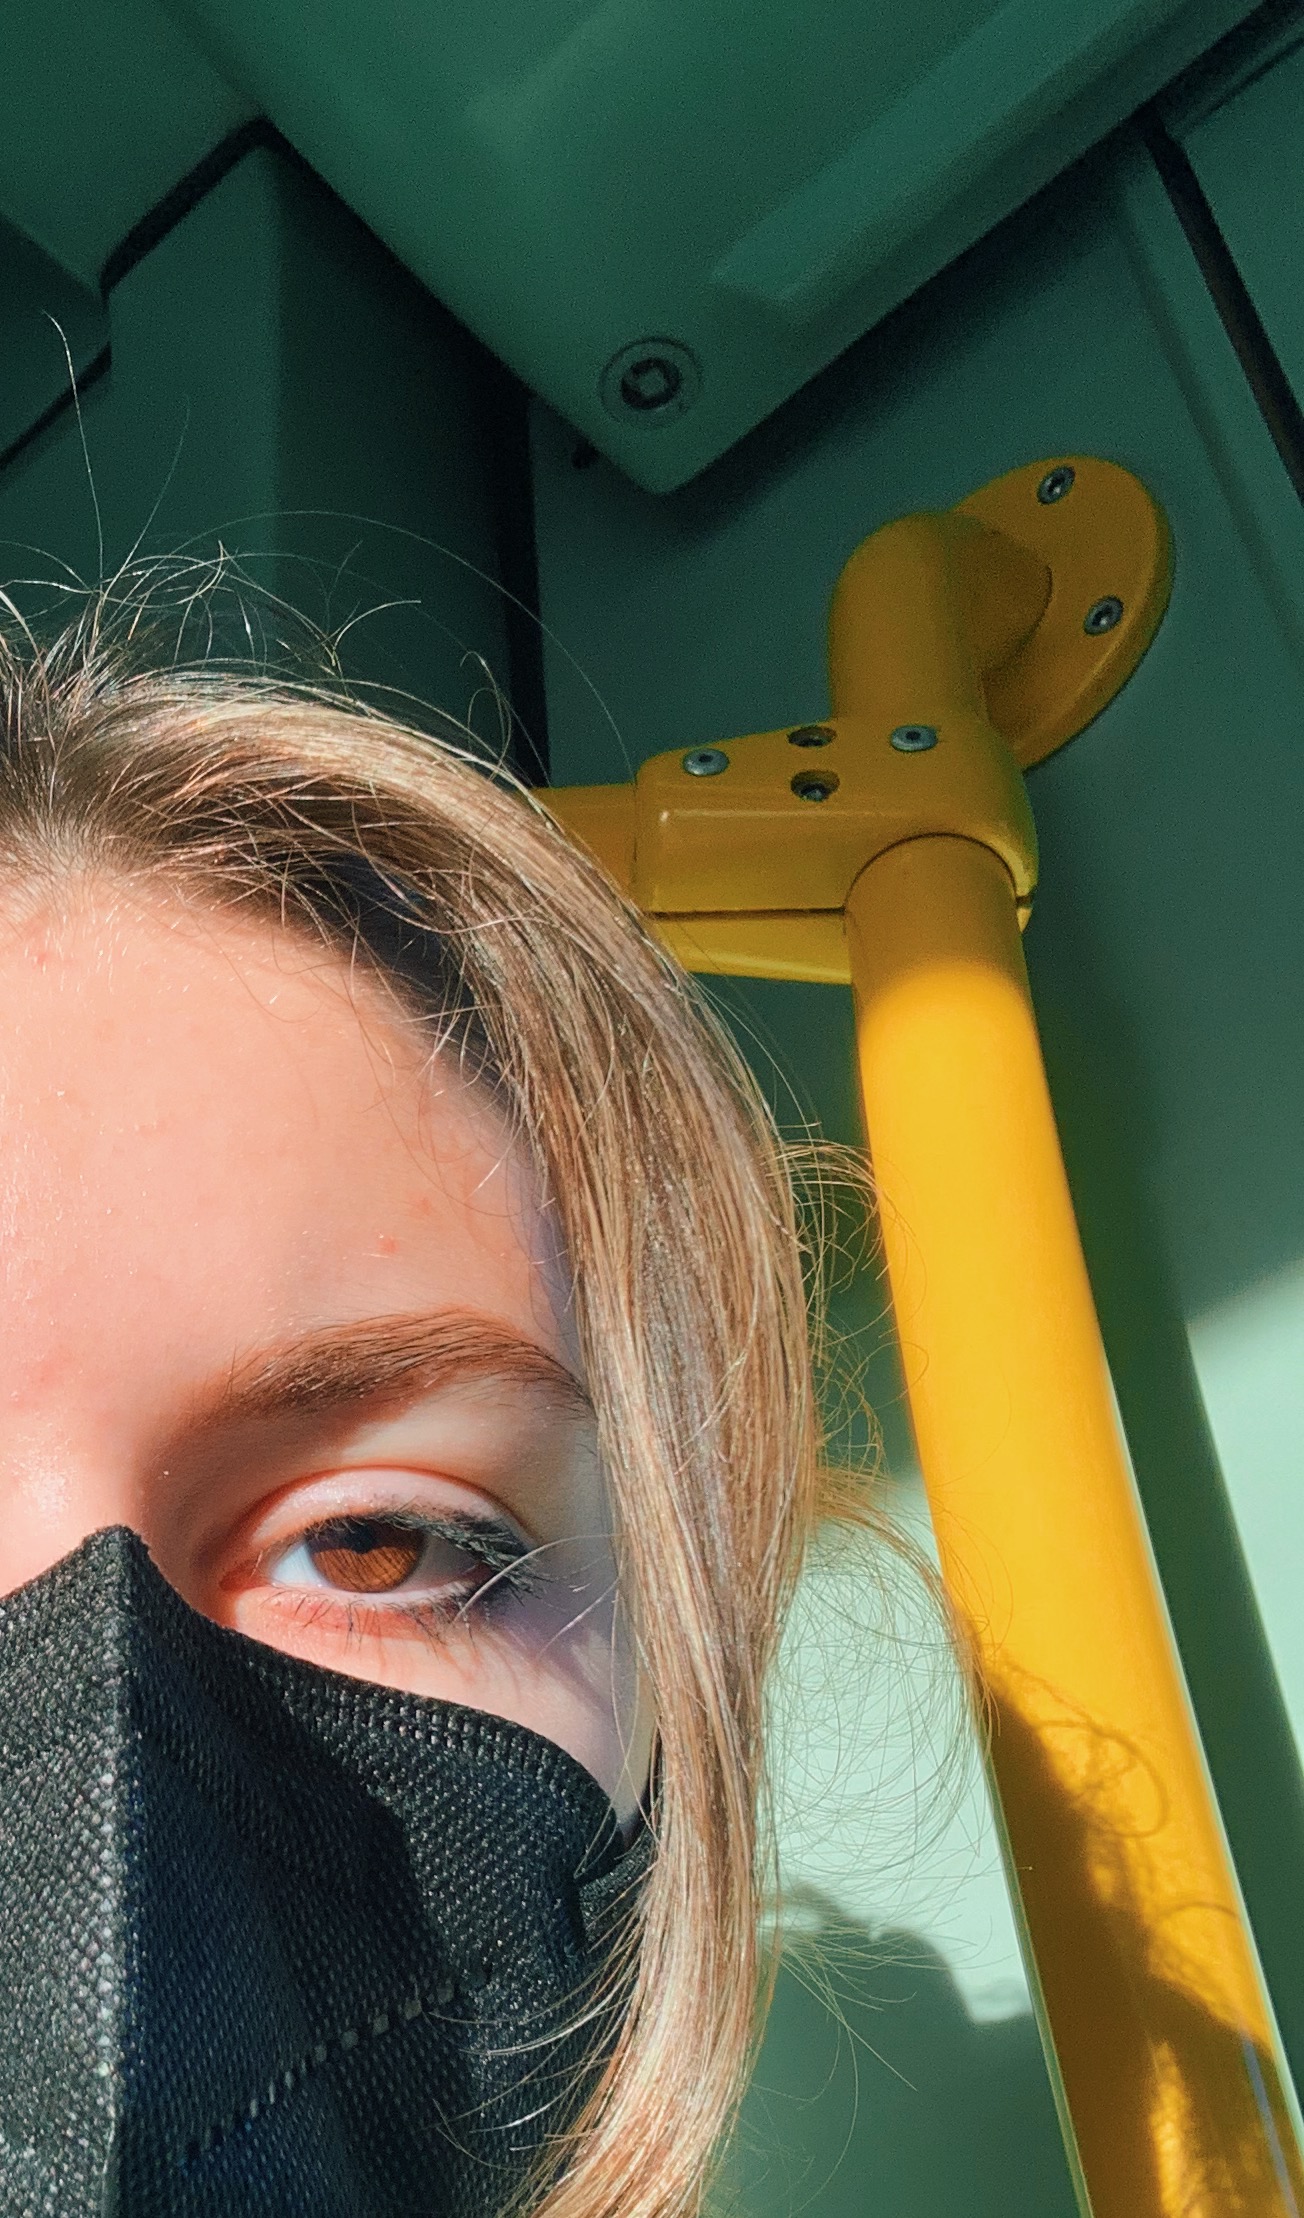 Me and my eye, conquering the public transportation system.